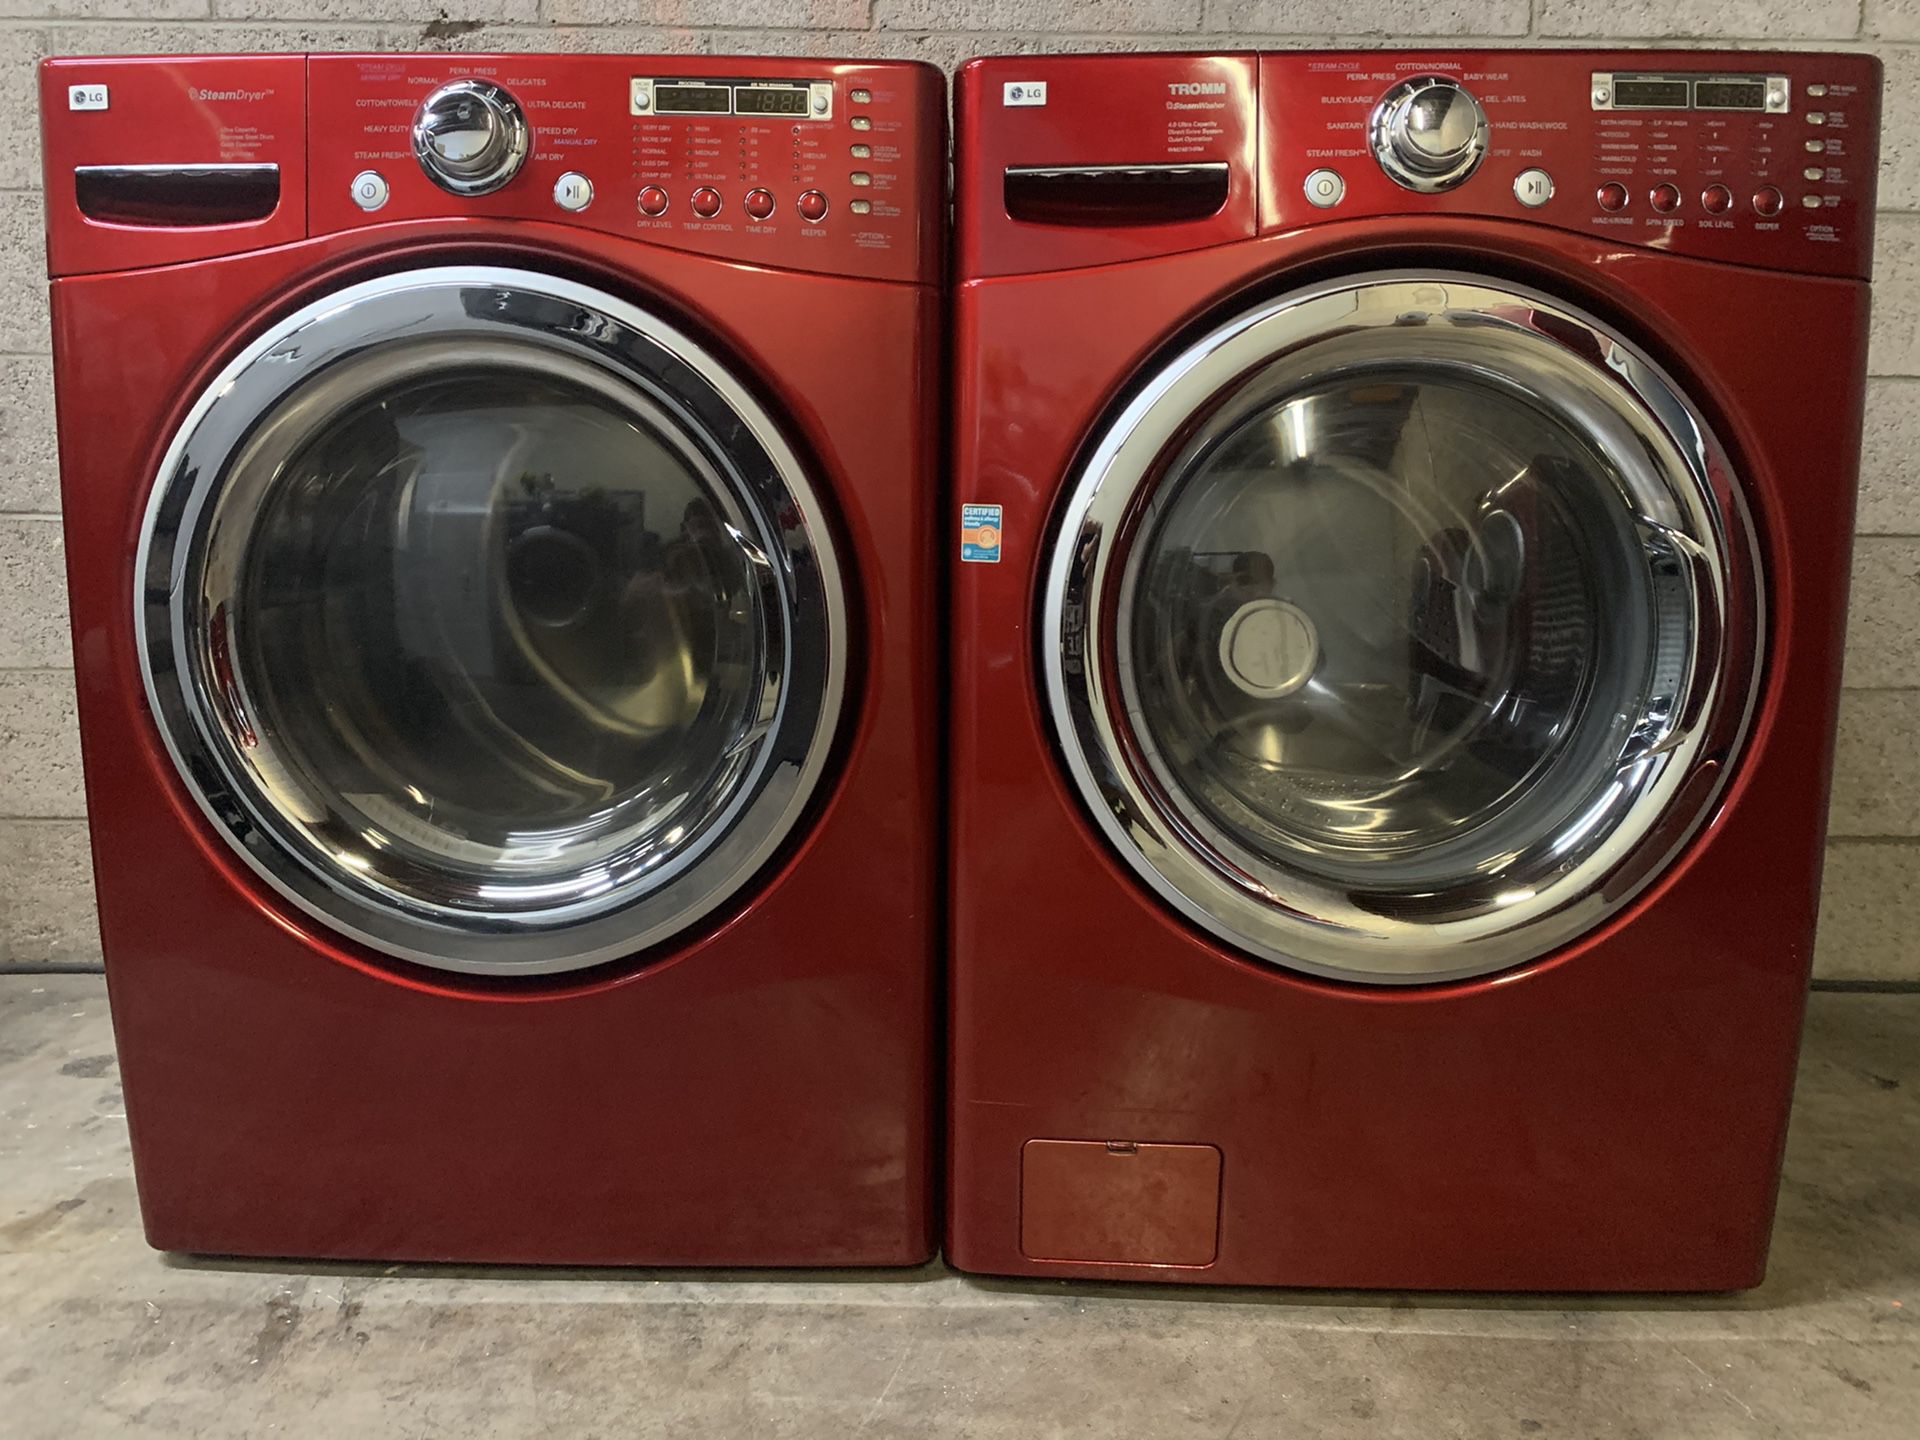 BEAUTIFUL CANDY RED APPLE LG STEAM WASHER AND DRYER EXCELLENT CONDITION